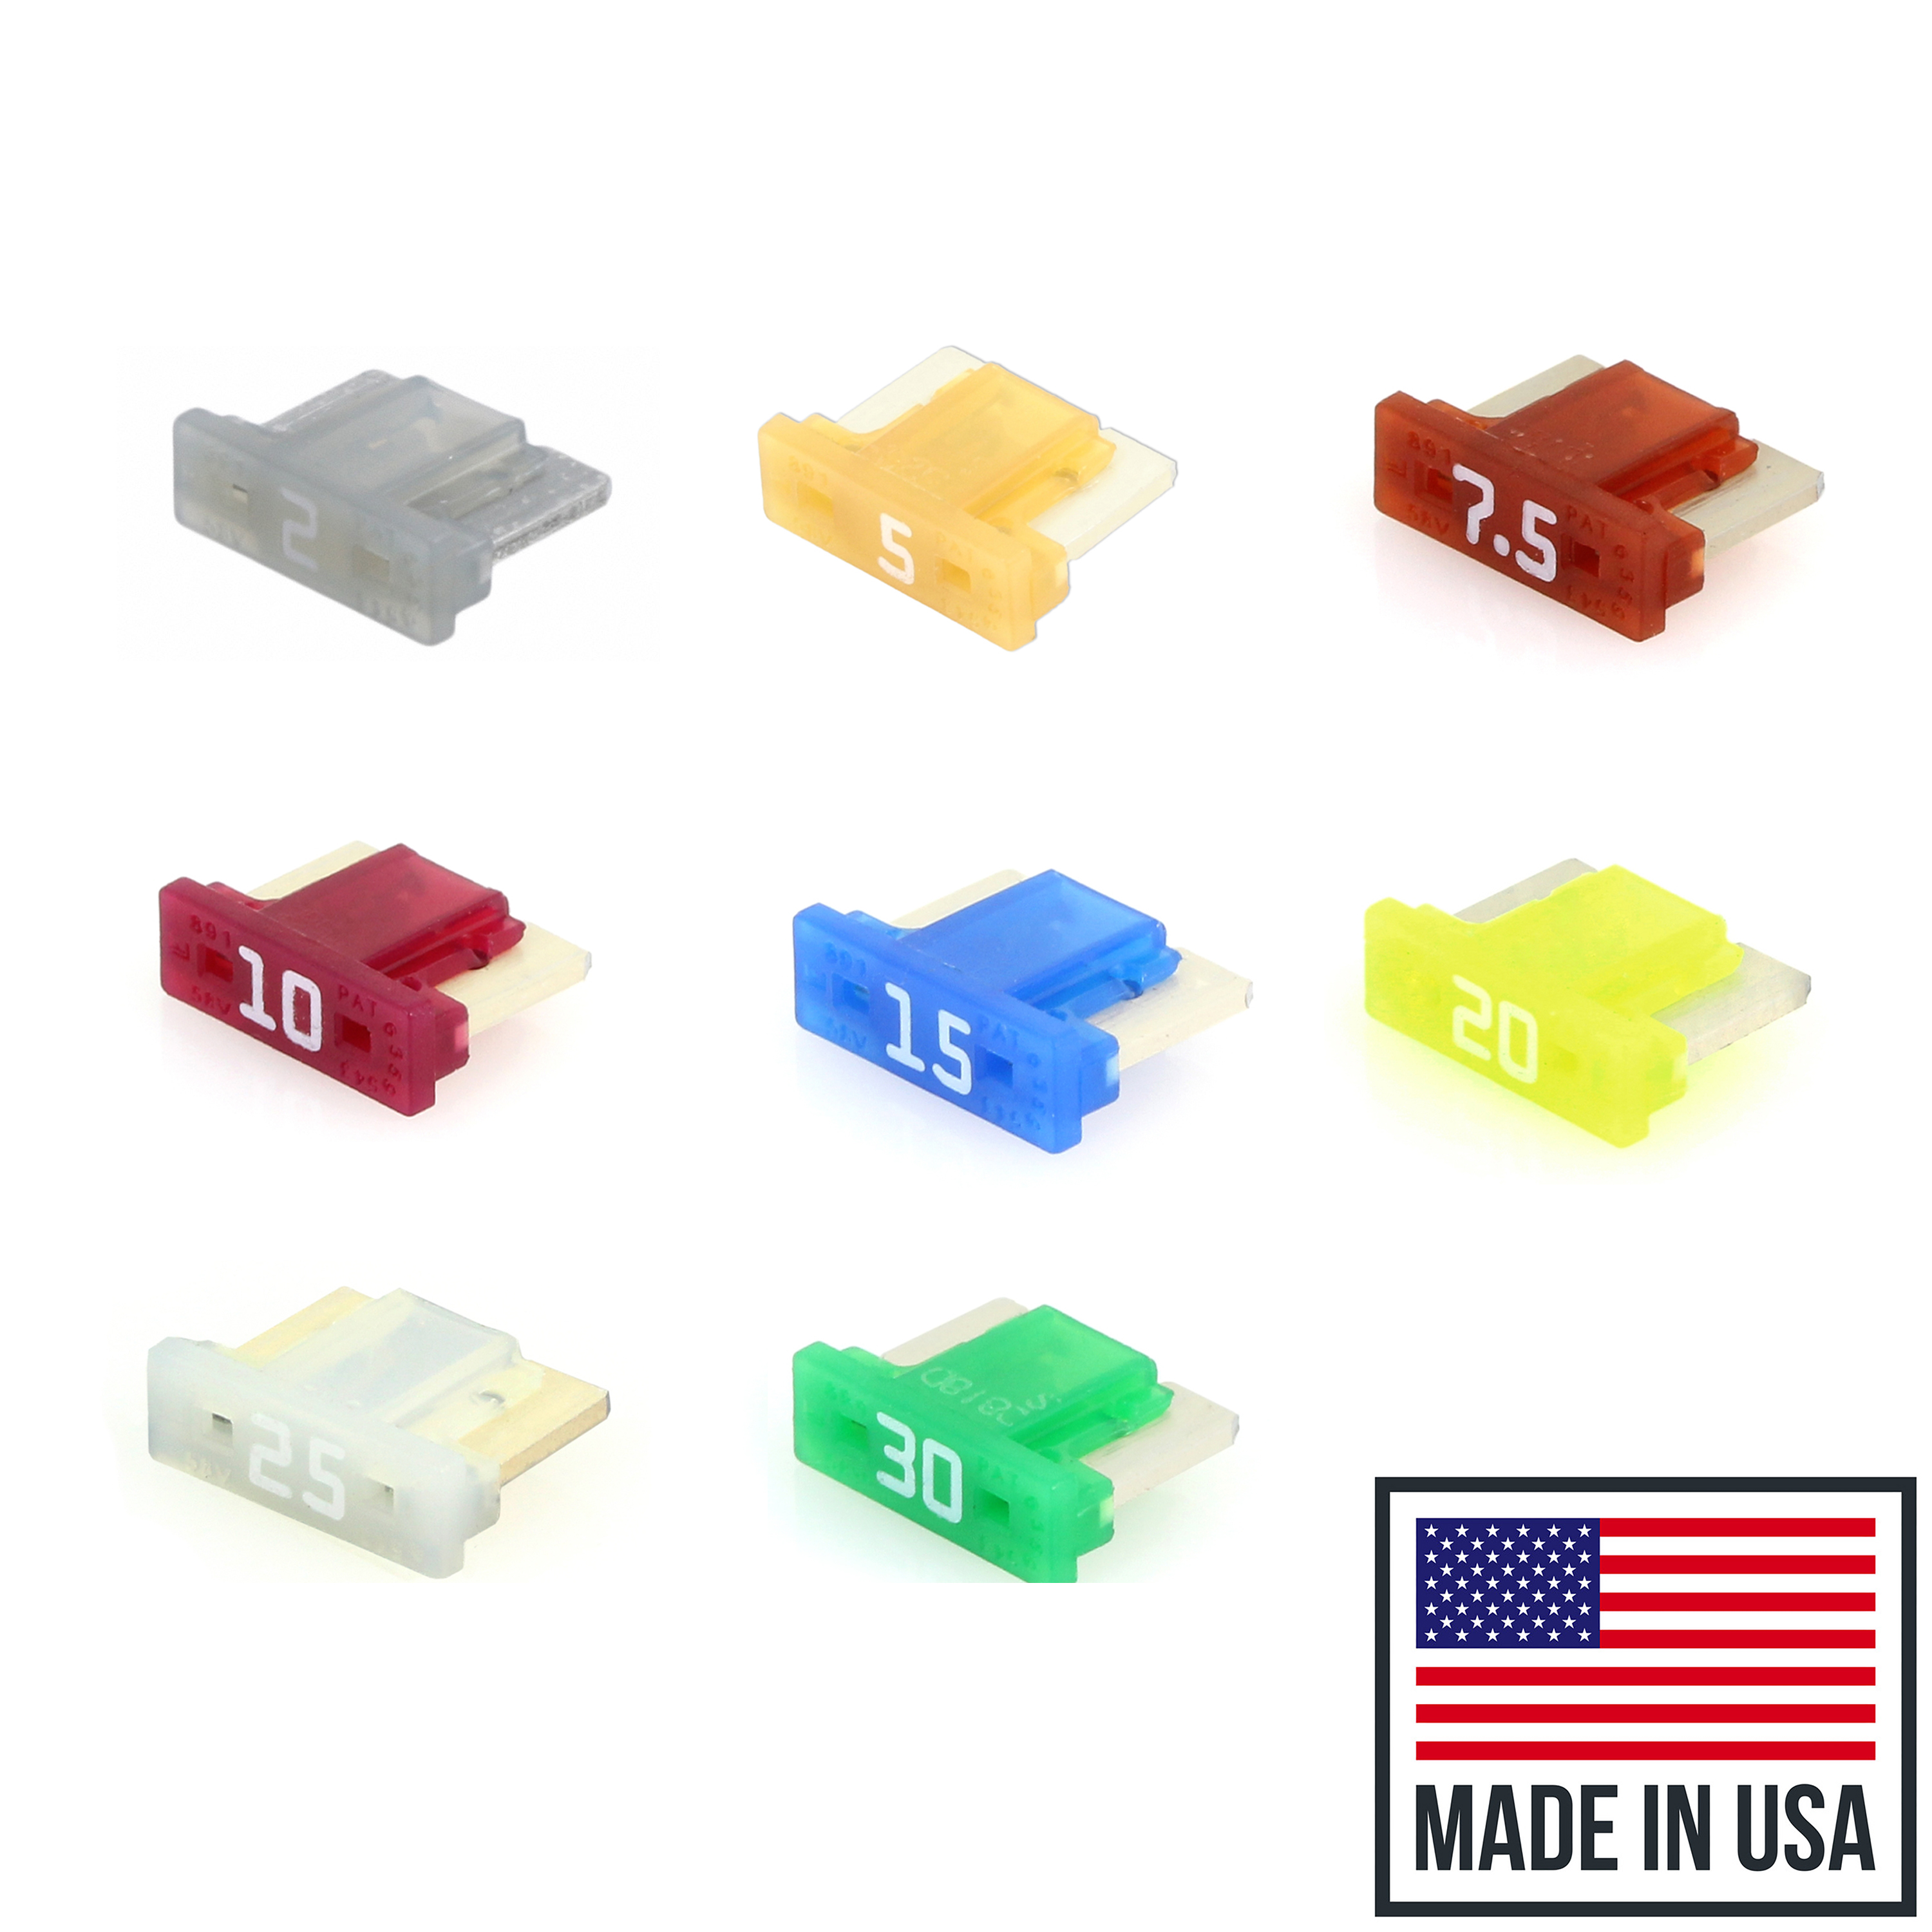 ATLM - Low Profile Mini Fuses - Made in USA